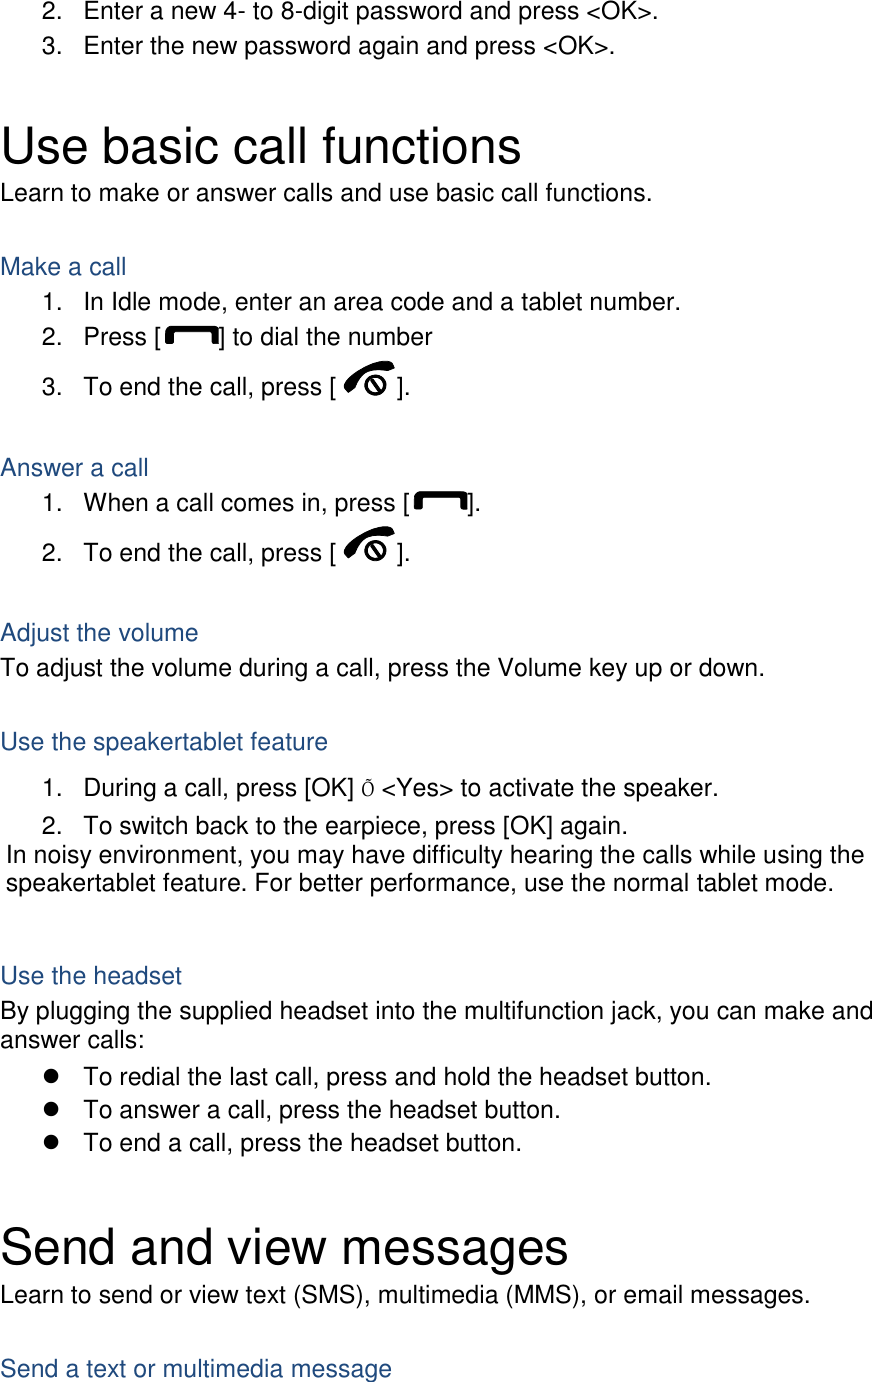 2.  Enter a new 4- to 8-digit password and press &lt;OK&gt;. 3.  Enter the new password again and press &lt;OK&gt;.  Use basic call functions Learn to make or answer calls and use basic call functions.  Make a call 1.  In Idle mode, enter an area code and a tablet number. 2.  Press [ ] to dial the number 3.  To end the call, press [ ].    Answer a call 1.  When a call comes in, press [ ]. 2.  To end the call, press [ ].  Adjust the volume To adjust the volume during a call, press the Volume key up or down.  Use the speakertablet feature 1.  During a call, press [OK] Õ &lt;Yes&gt; to activate the speaker. 2.  To switch back to the earpiece, press [OK] again. In noisy environment, you may have difficulty hearing the calls while using the speakertablet feature. For better performance, use the normal tablet mode.  Use the headset By plugging the supplied headset into the multifunction jack, you can make and answer calls:   To redial the last call, press and hold the headset button.   To answer a call, press the headset button.   To end a call, press the headset button.  Send and view messages Learn to send or view text (SMS), multimedia (MMS), or email messages.  Send a text or multimedia message 